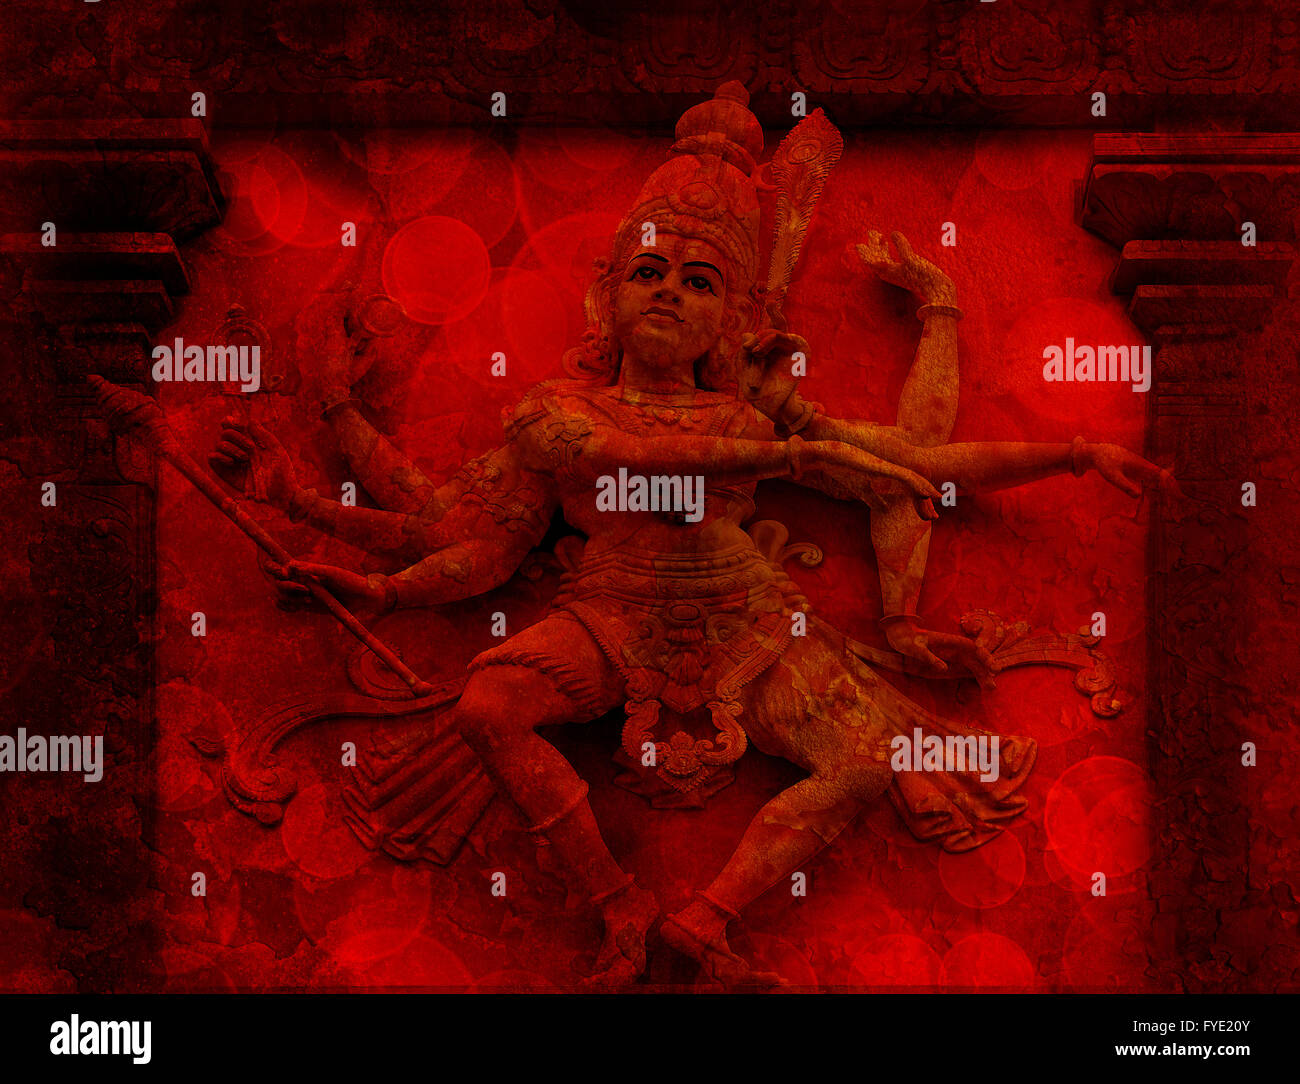 Nataraj Dancing Form of Lord Shiva Hindu God Statue on Temple Exterior Wall Relief in Red Grunge Texture Background Stock Photo